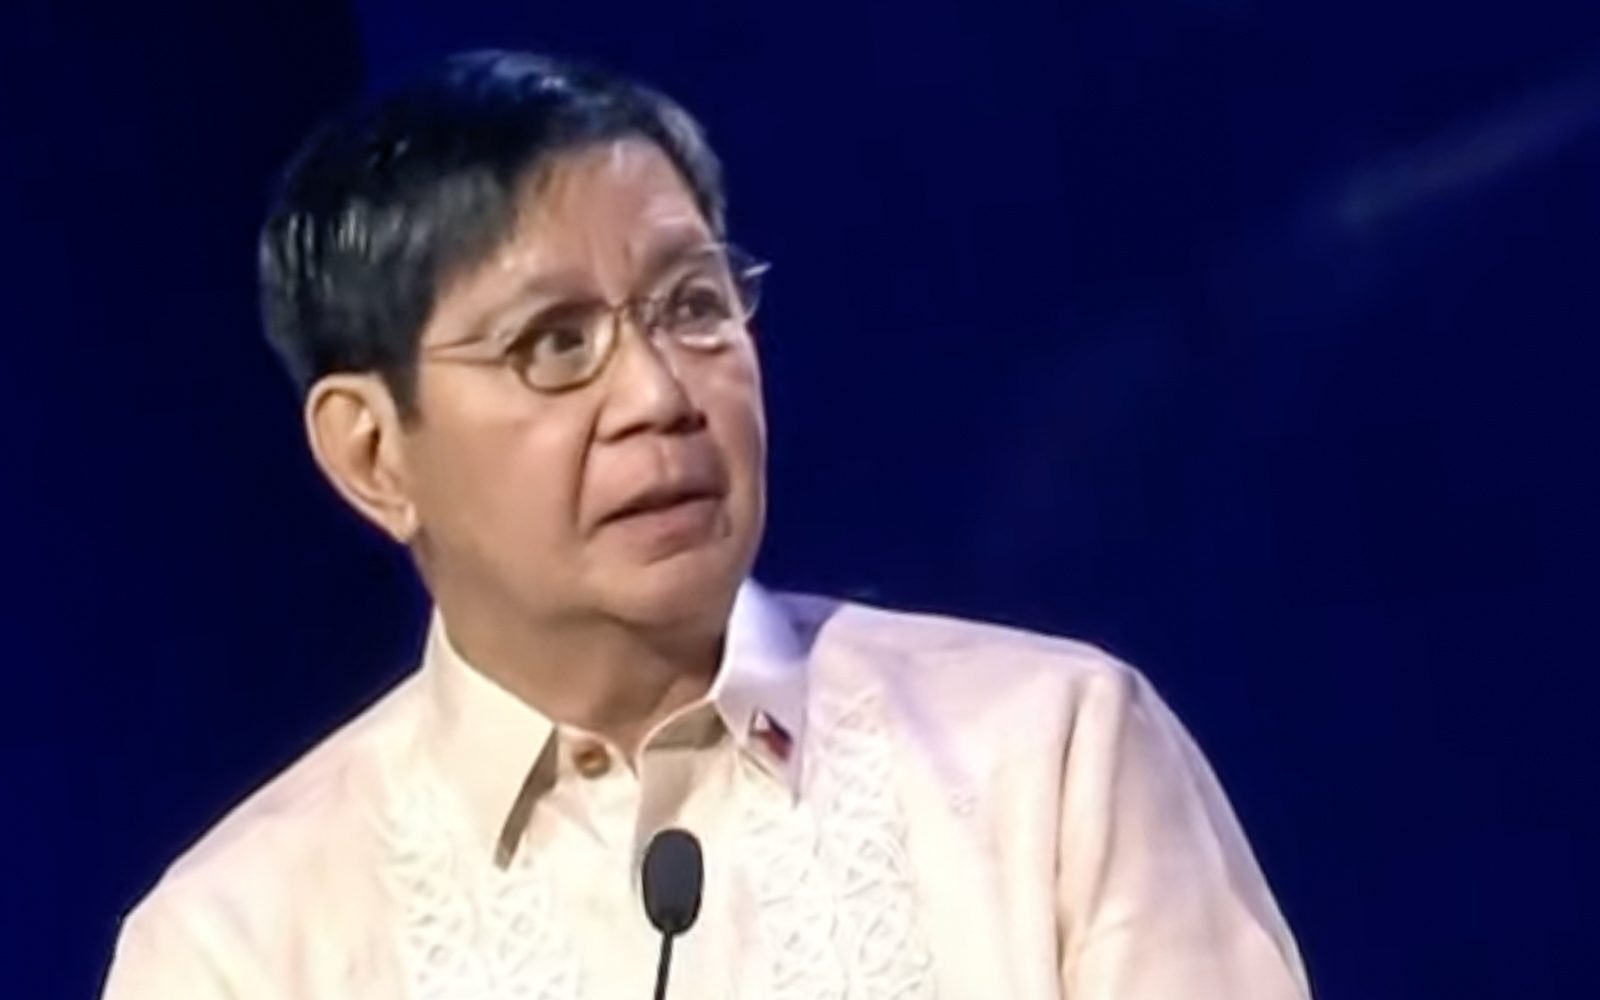 LIST: Plans Lacson failed to share in time-constrained CNN PH debate